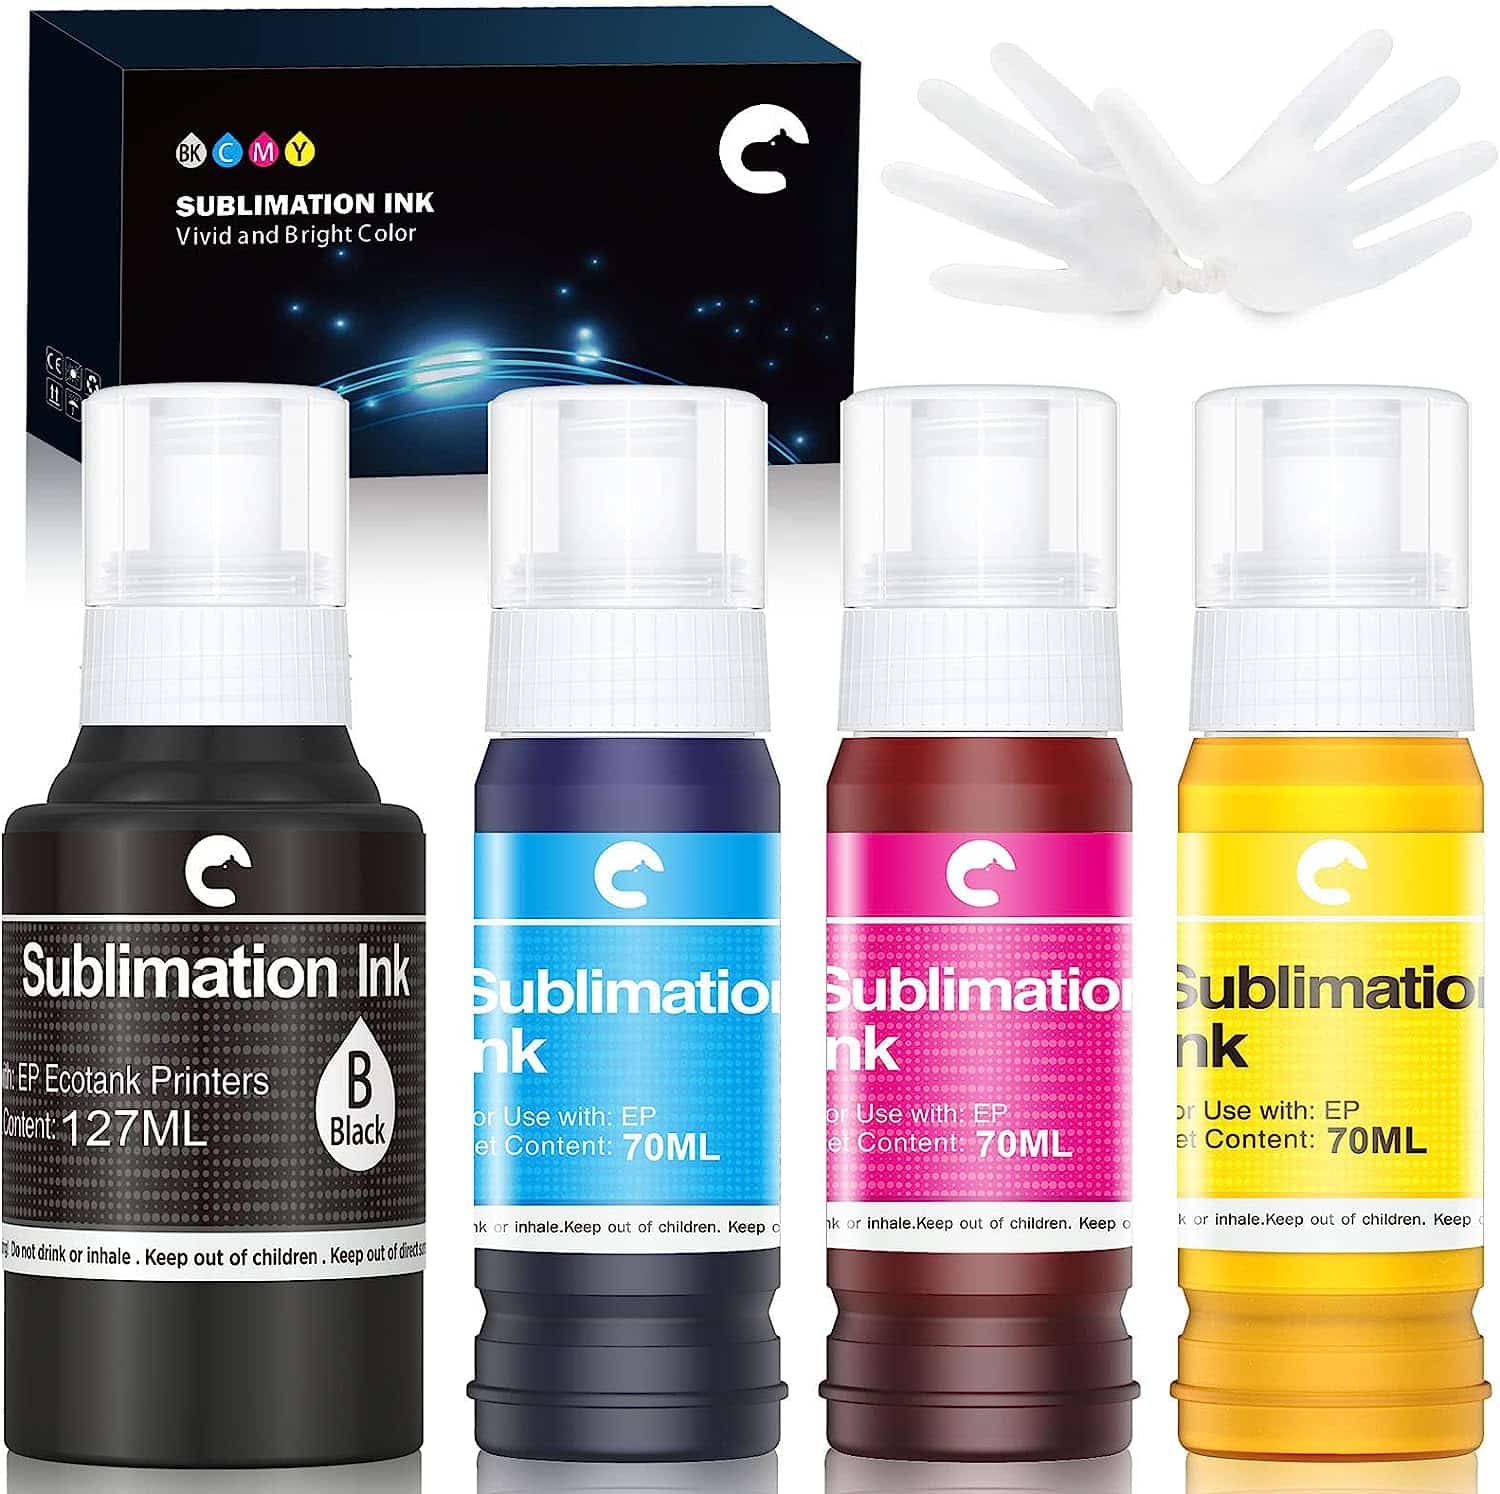 Hiipoo Sublimation Ink Refill for Inkjet Printers